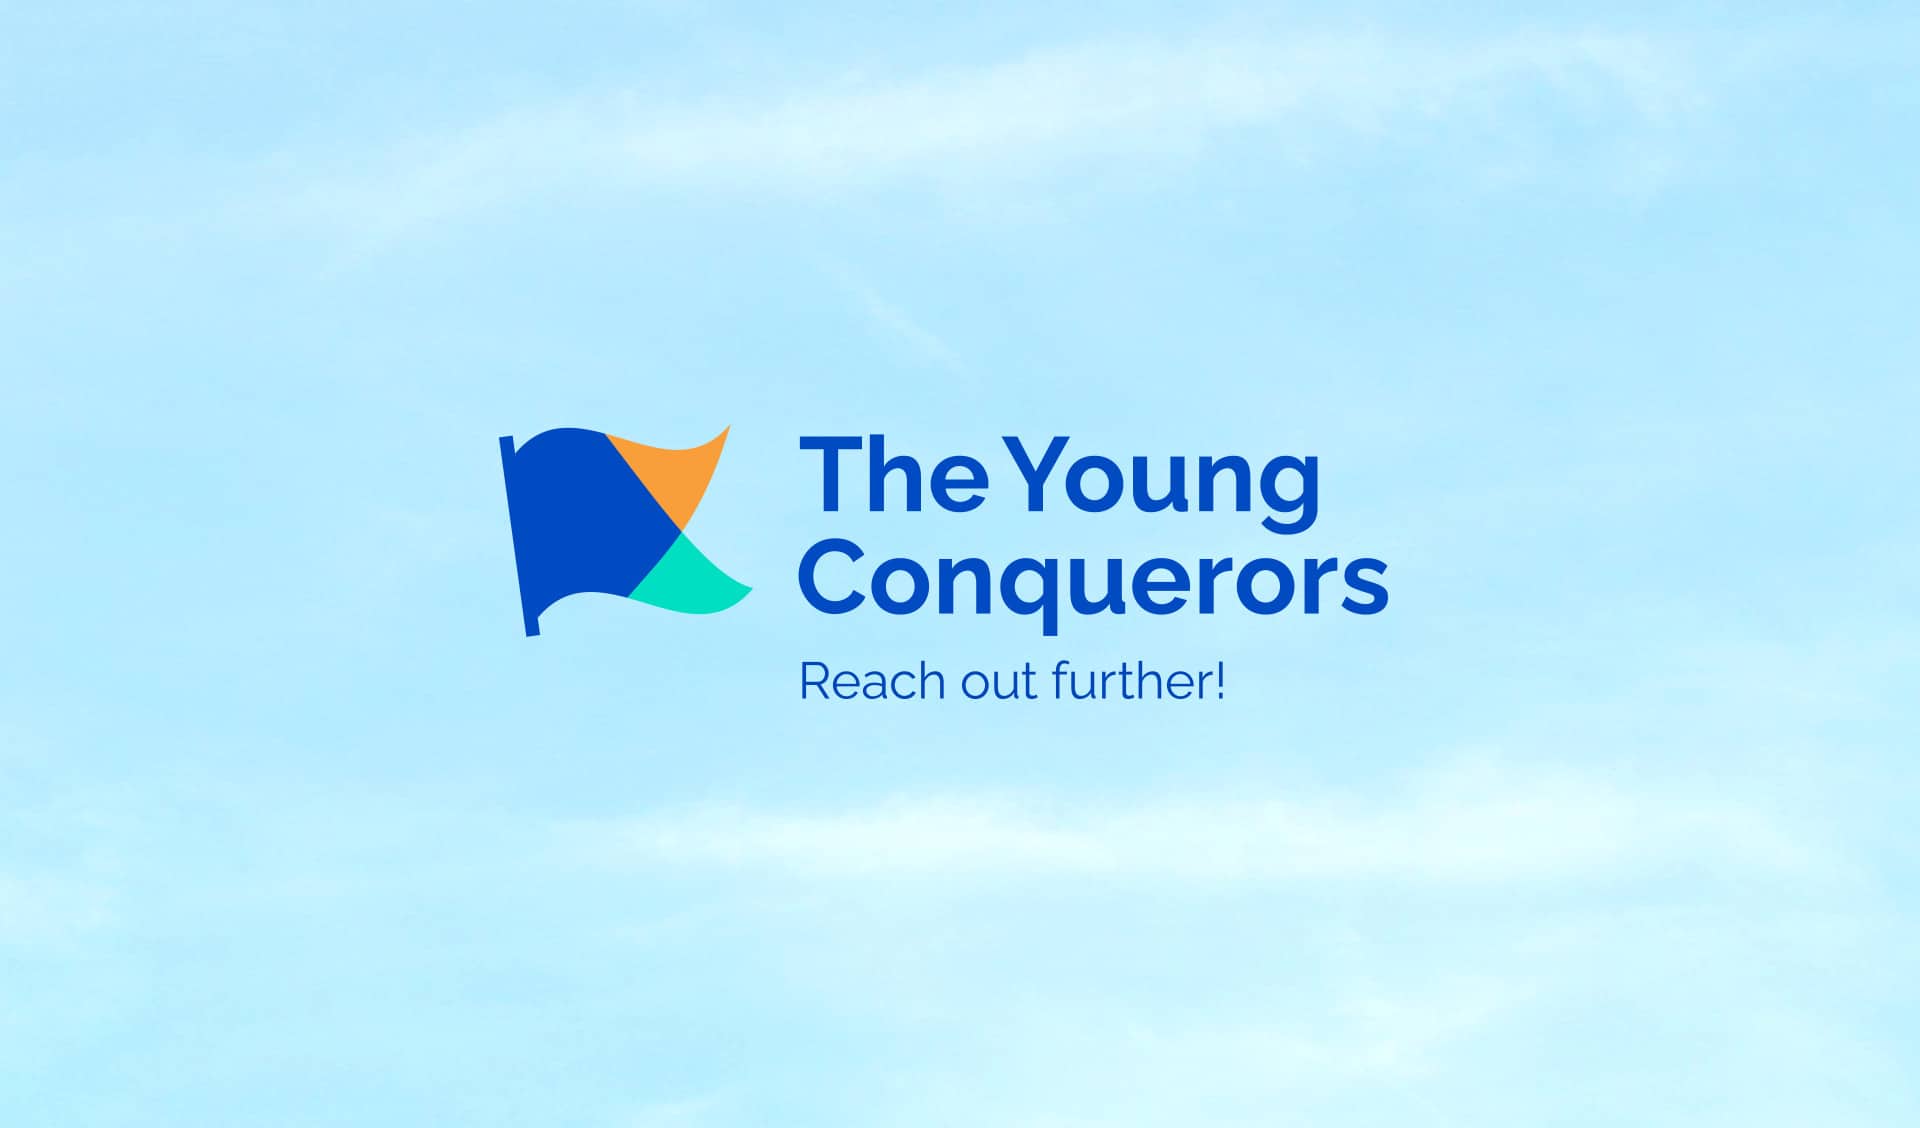 The Young Conquerors - Visual Identity